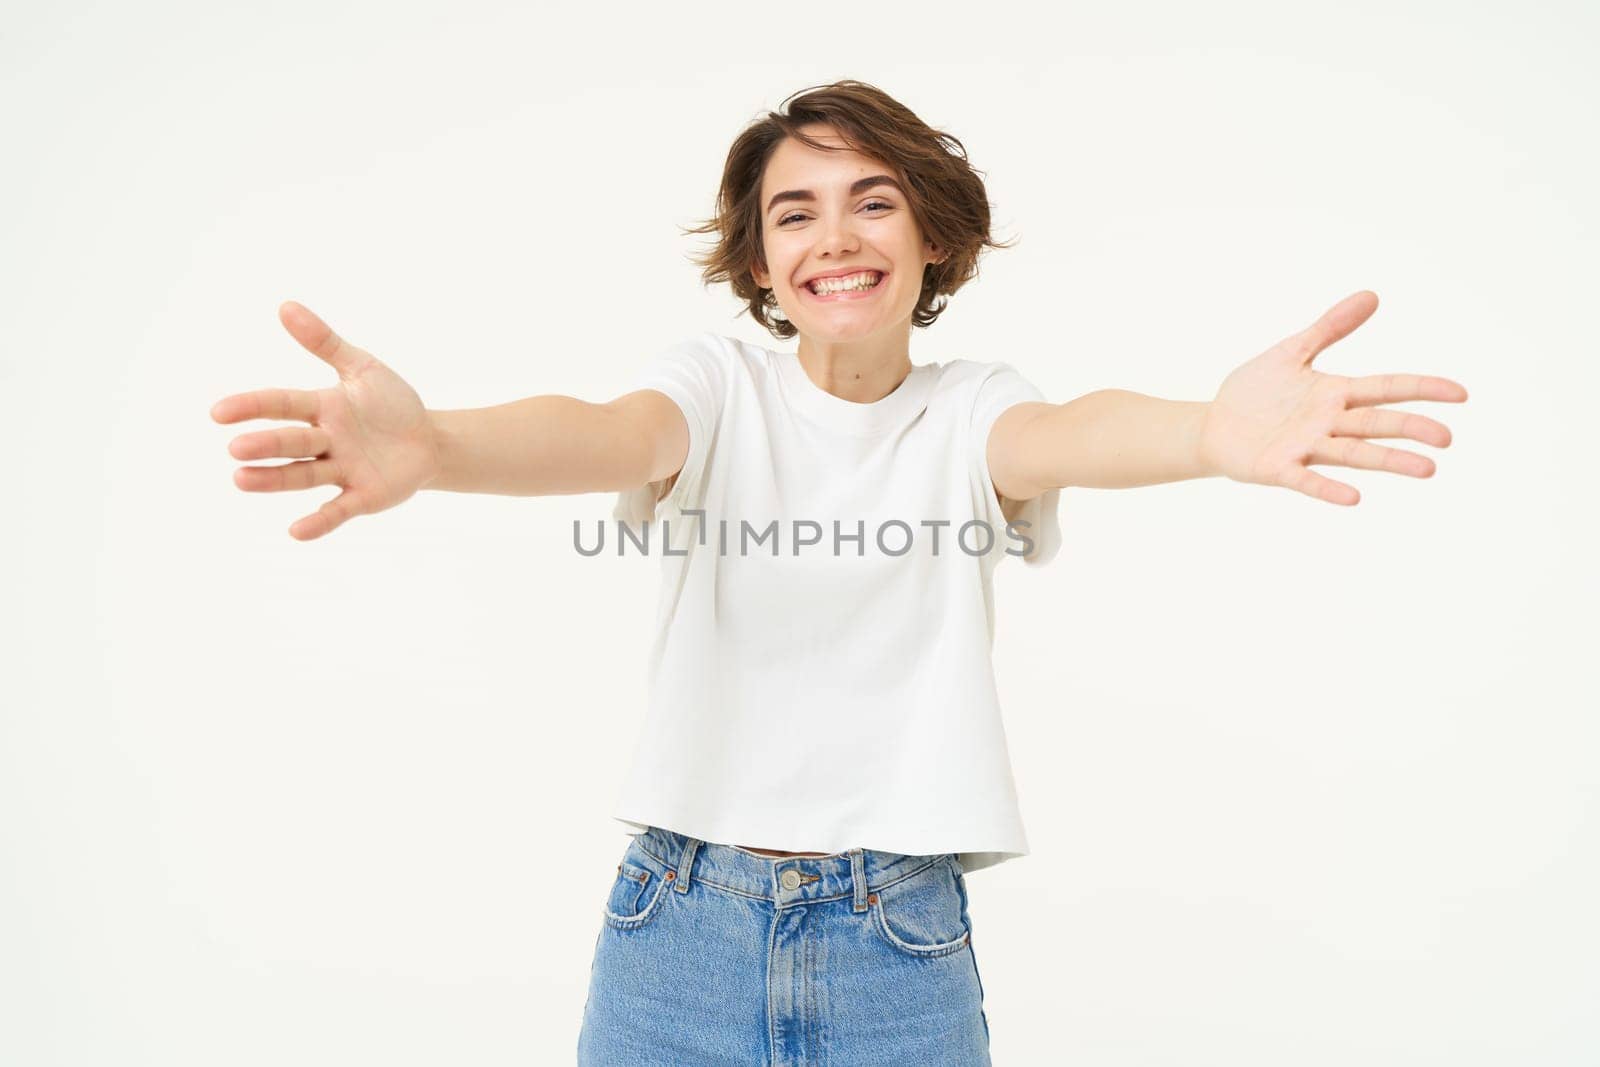 Portrait of beautiful, friendly woman stretching hands, hugging, extending arms for cuddle, embracing someone, standing against white background.